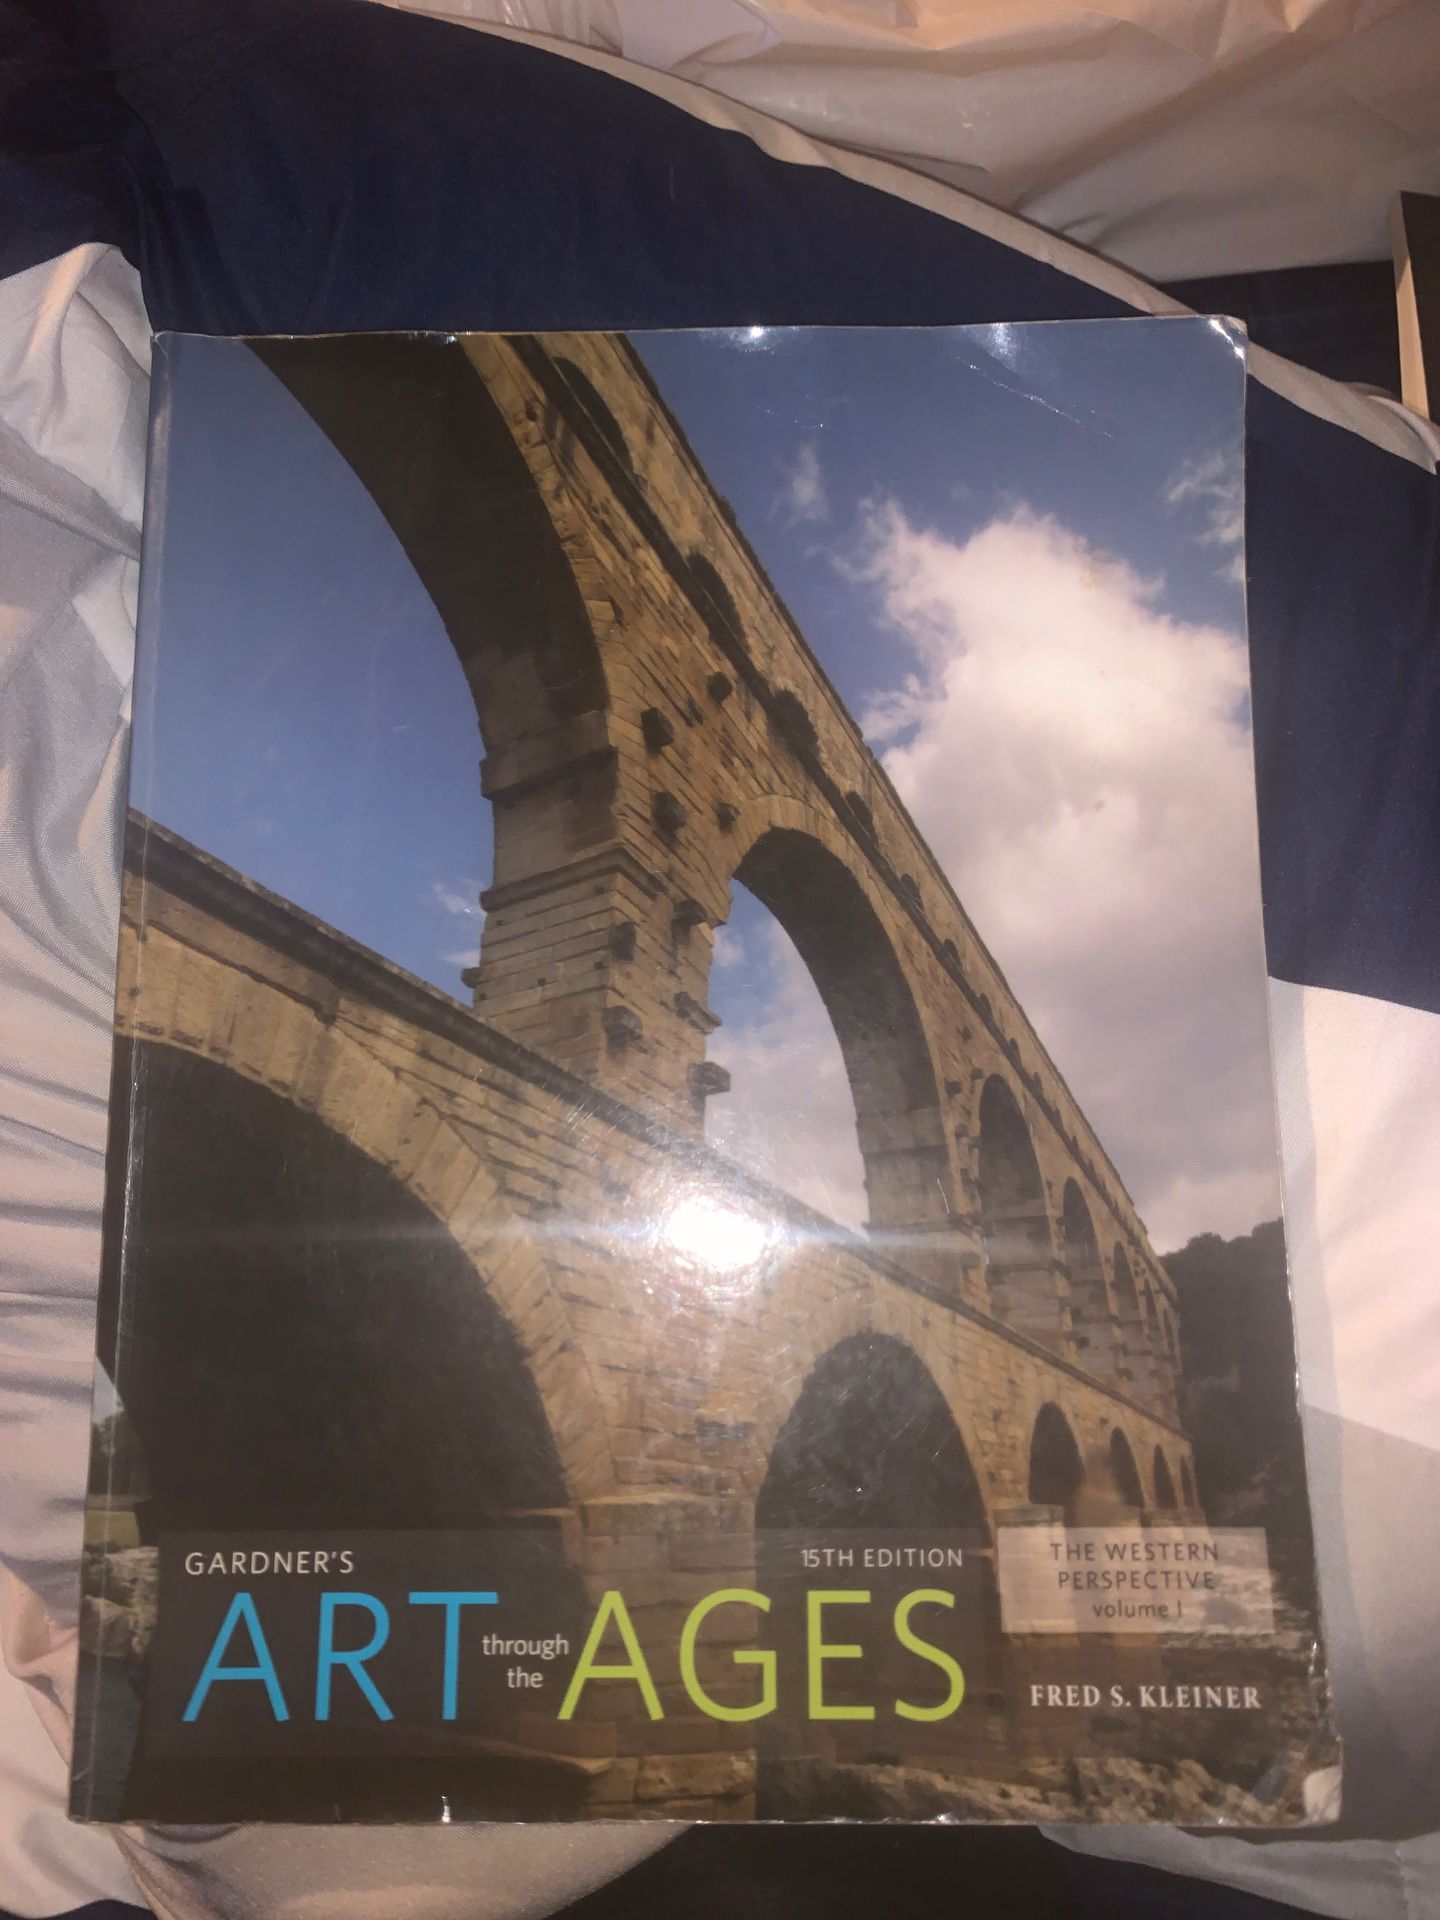 Art through the Ages by Fred S. Kleiner